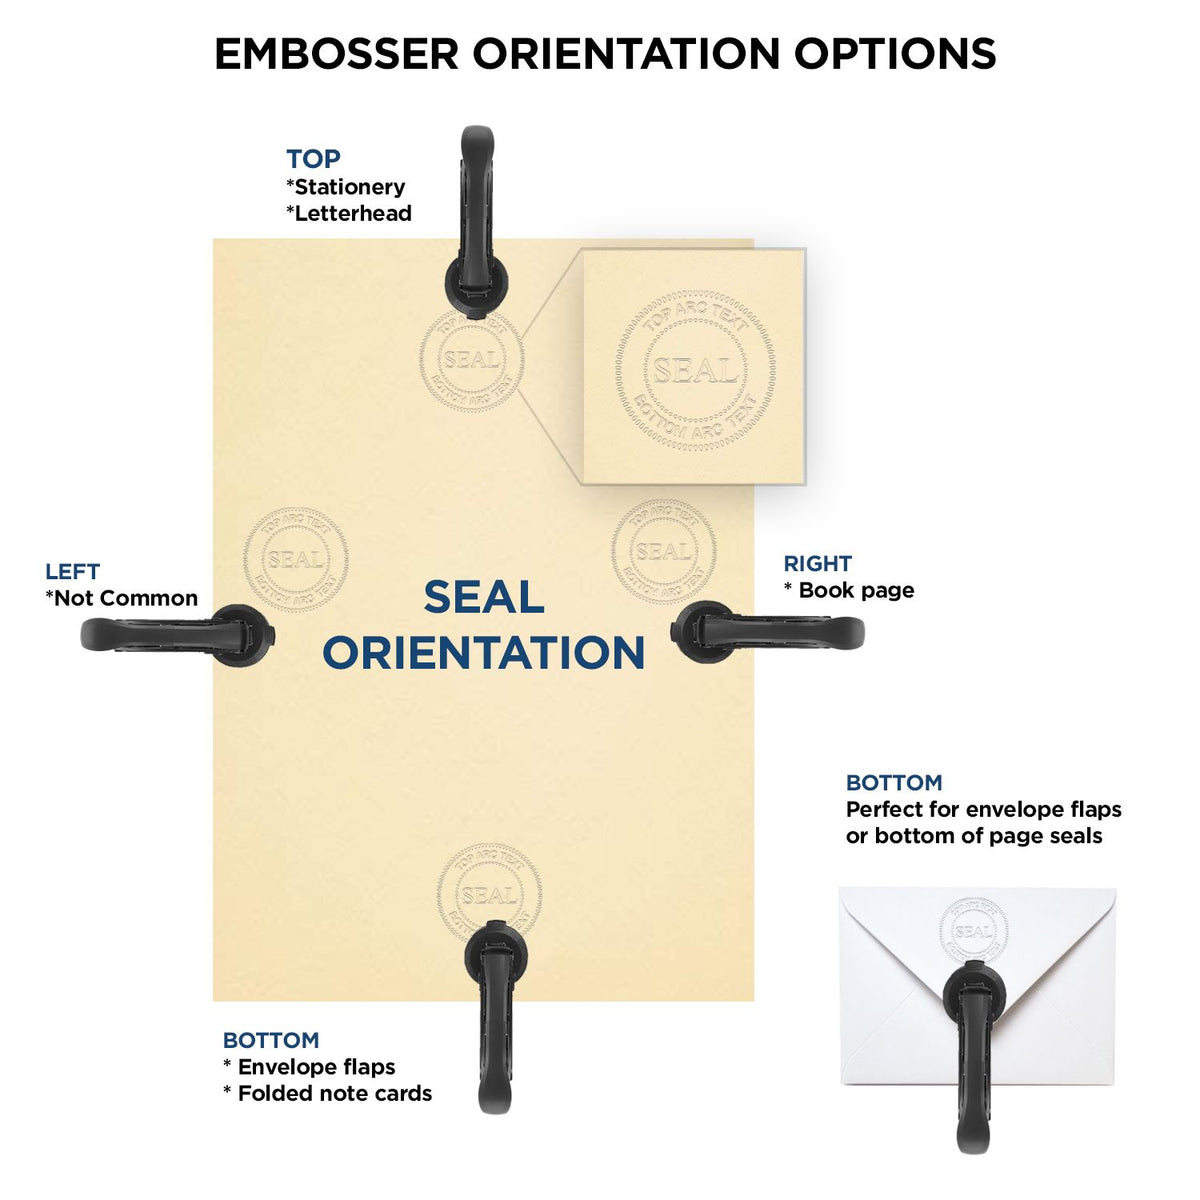 An infographic for the State of Indiana Long Reach Architectural Embossing Seal showing embosser orientation, this is showing examples of a top, bottom, right and left insert.